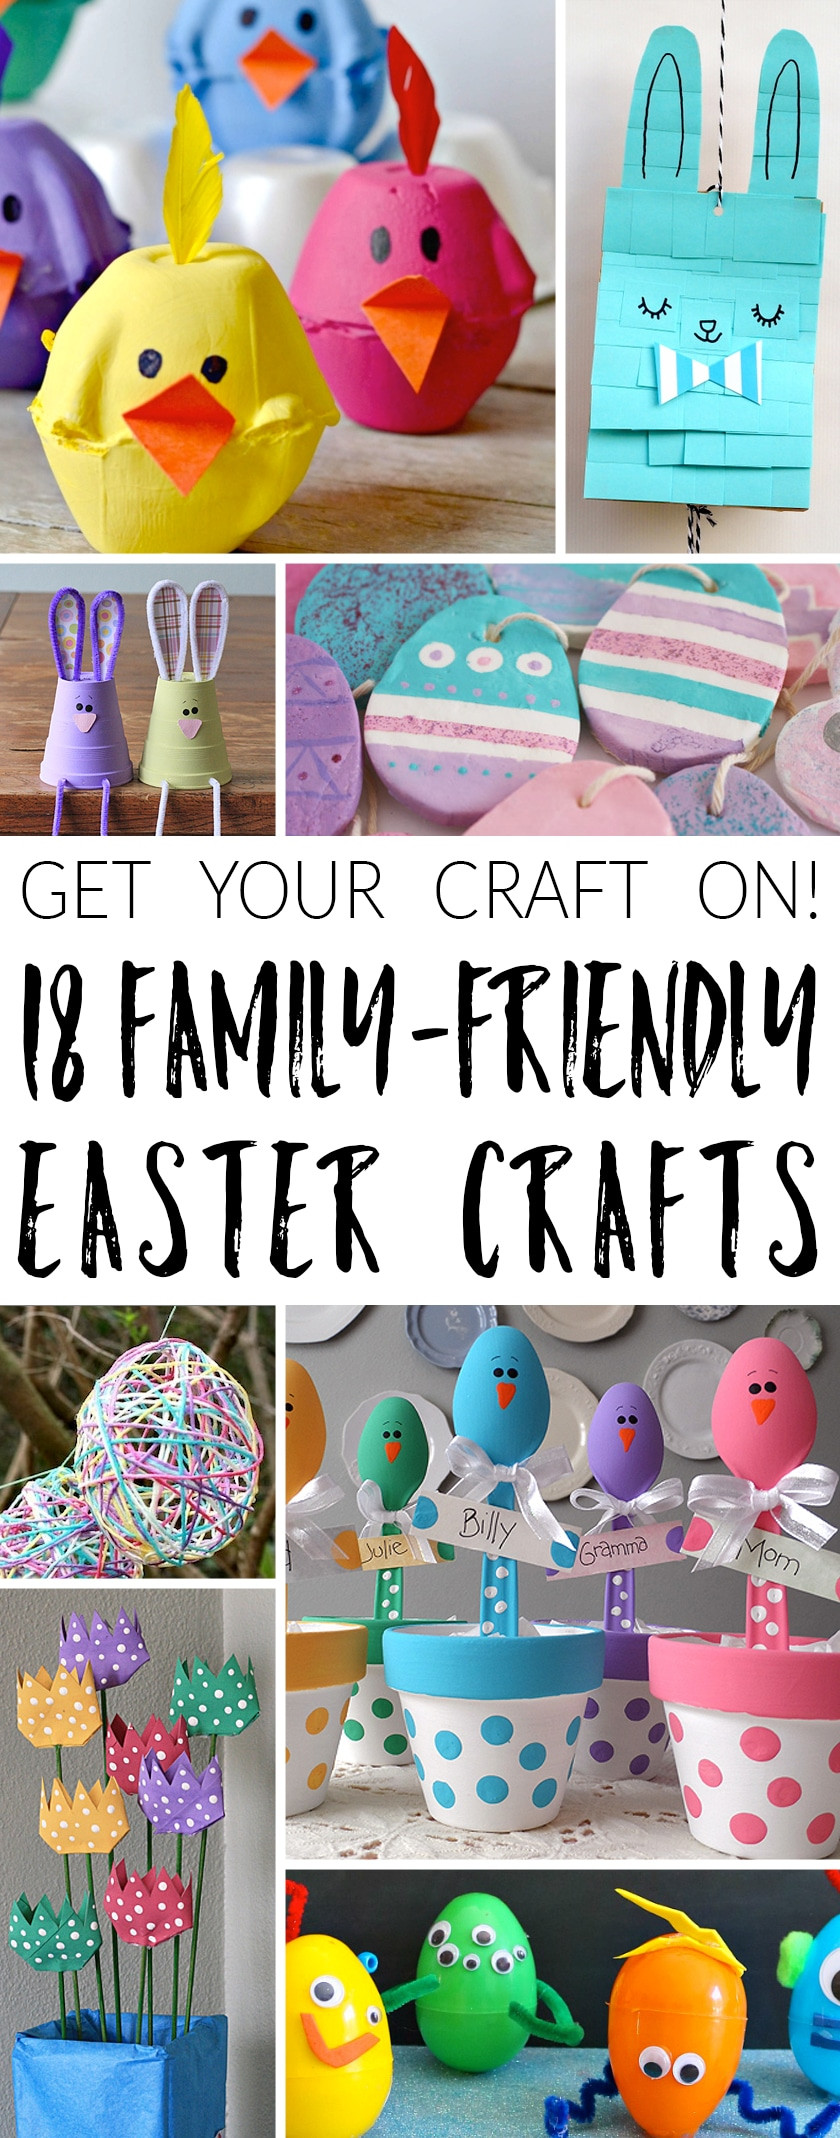 Family Easter Ideas
 Get your craft on 18 family friendly Easter craft ideas